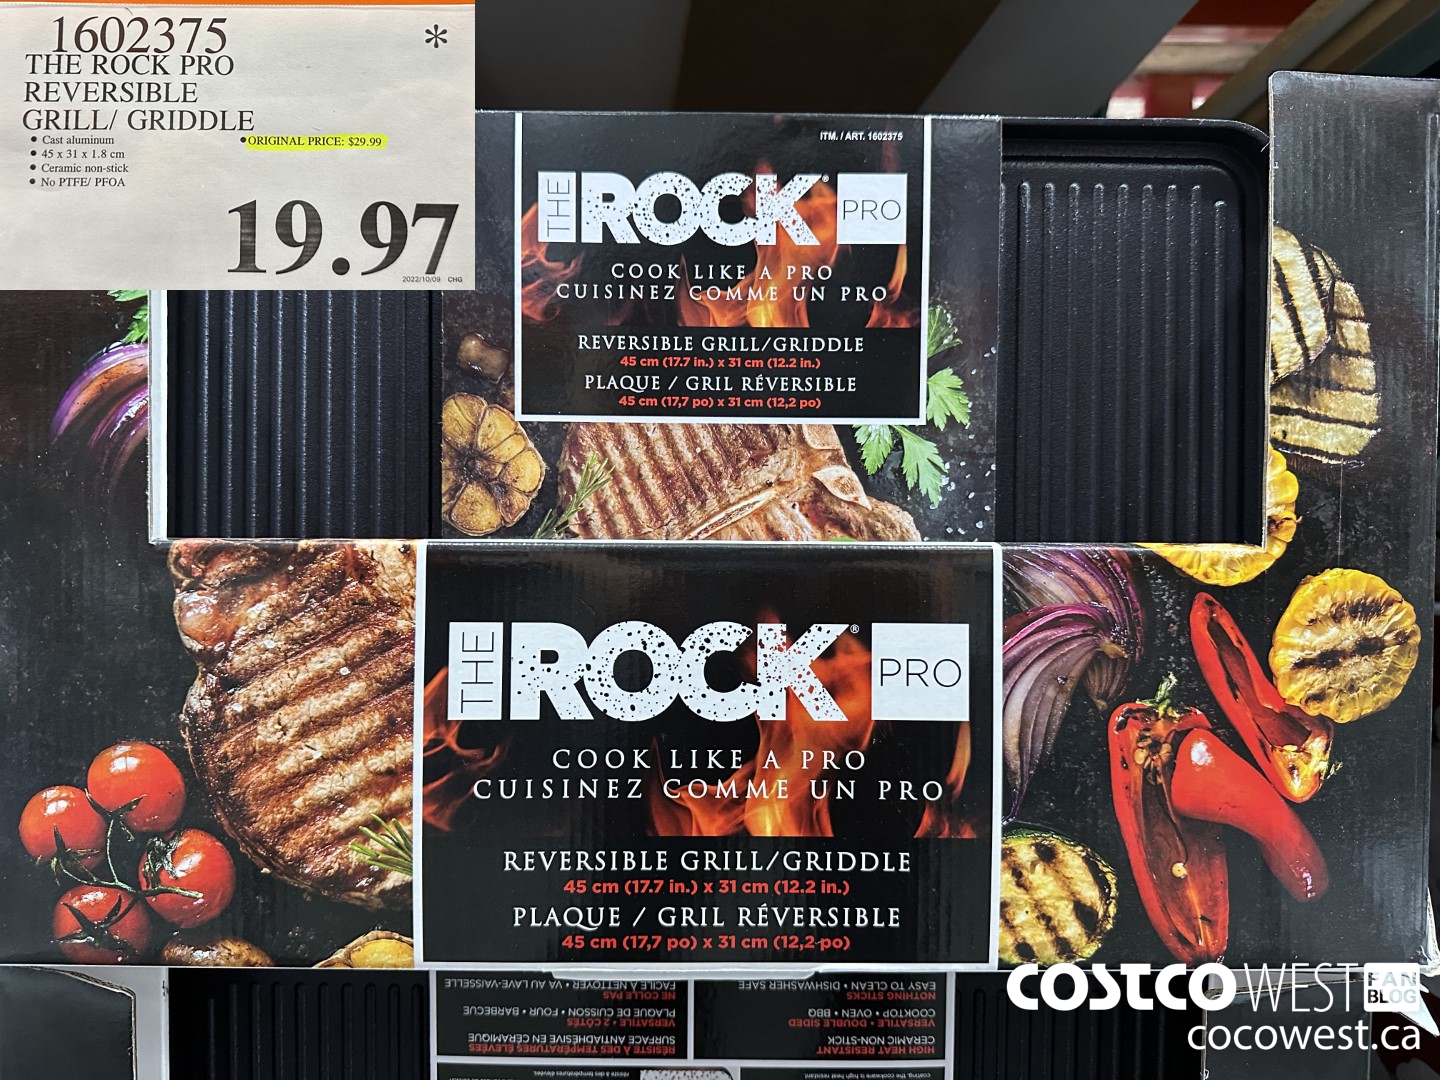 Costco Deals - Check out this The Rock Plus 10” Multi